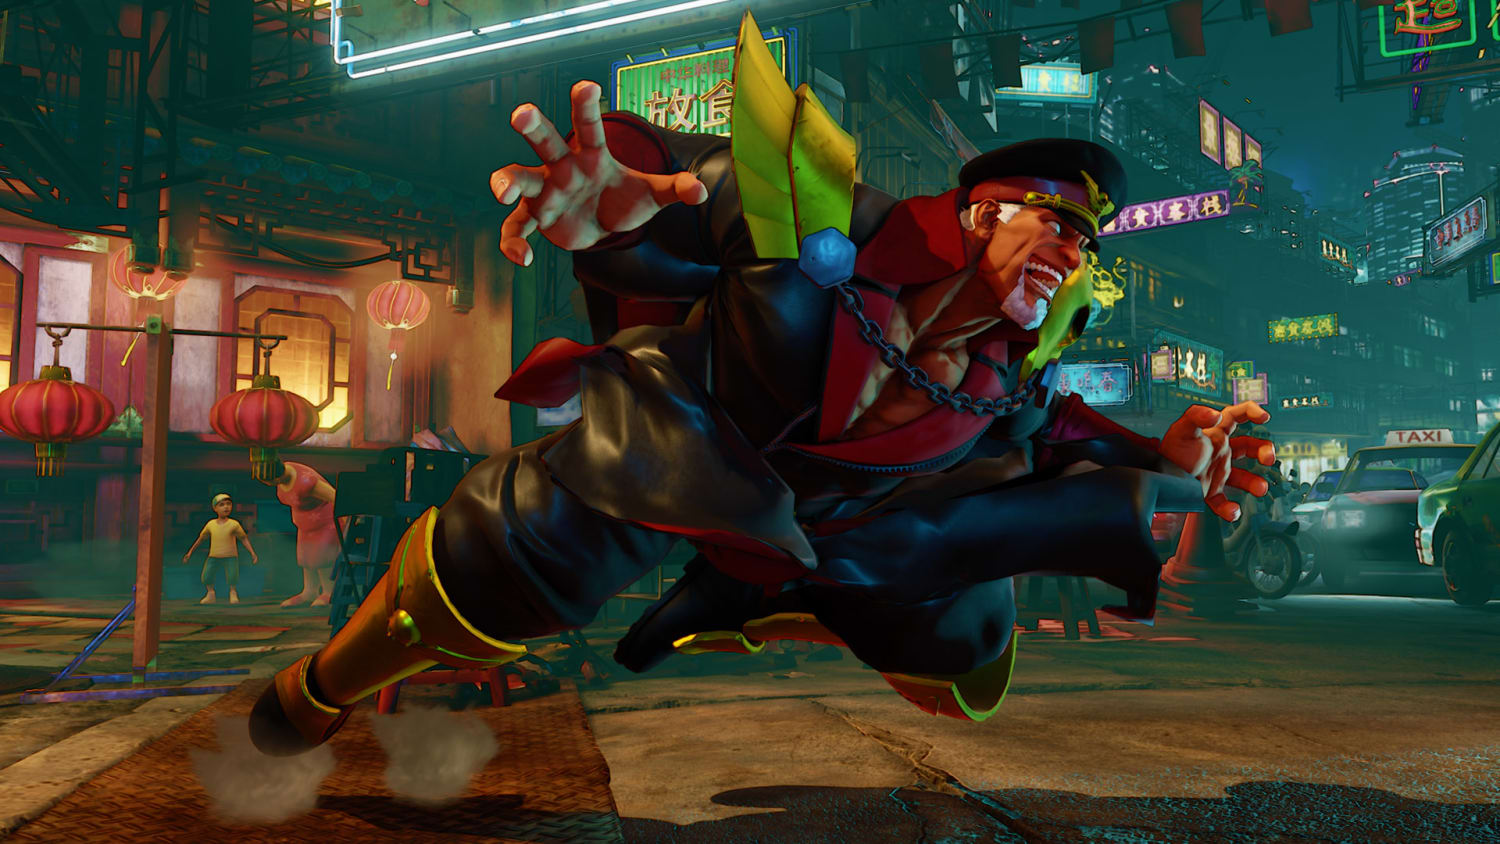 Necalli and Vega's moves Street Fighter 5 2 out of 2 image gallery